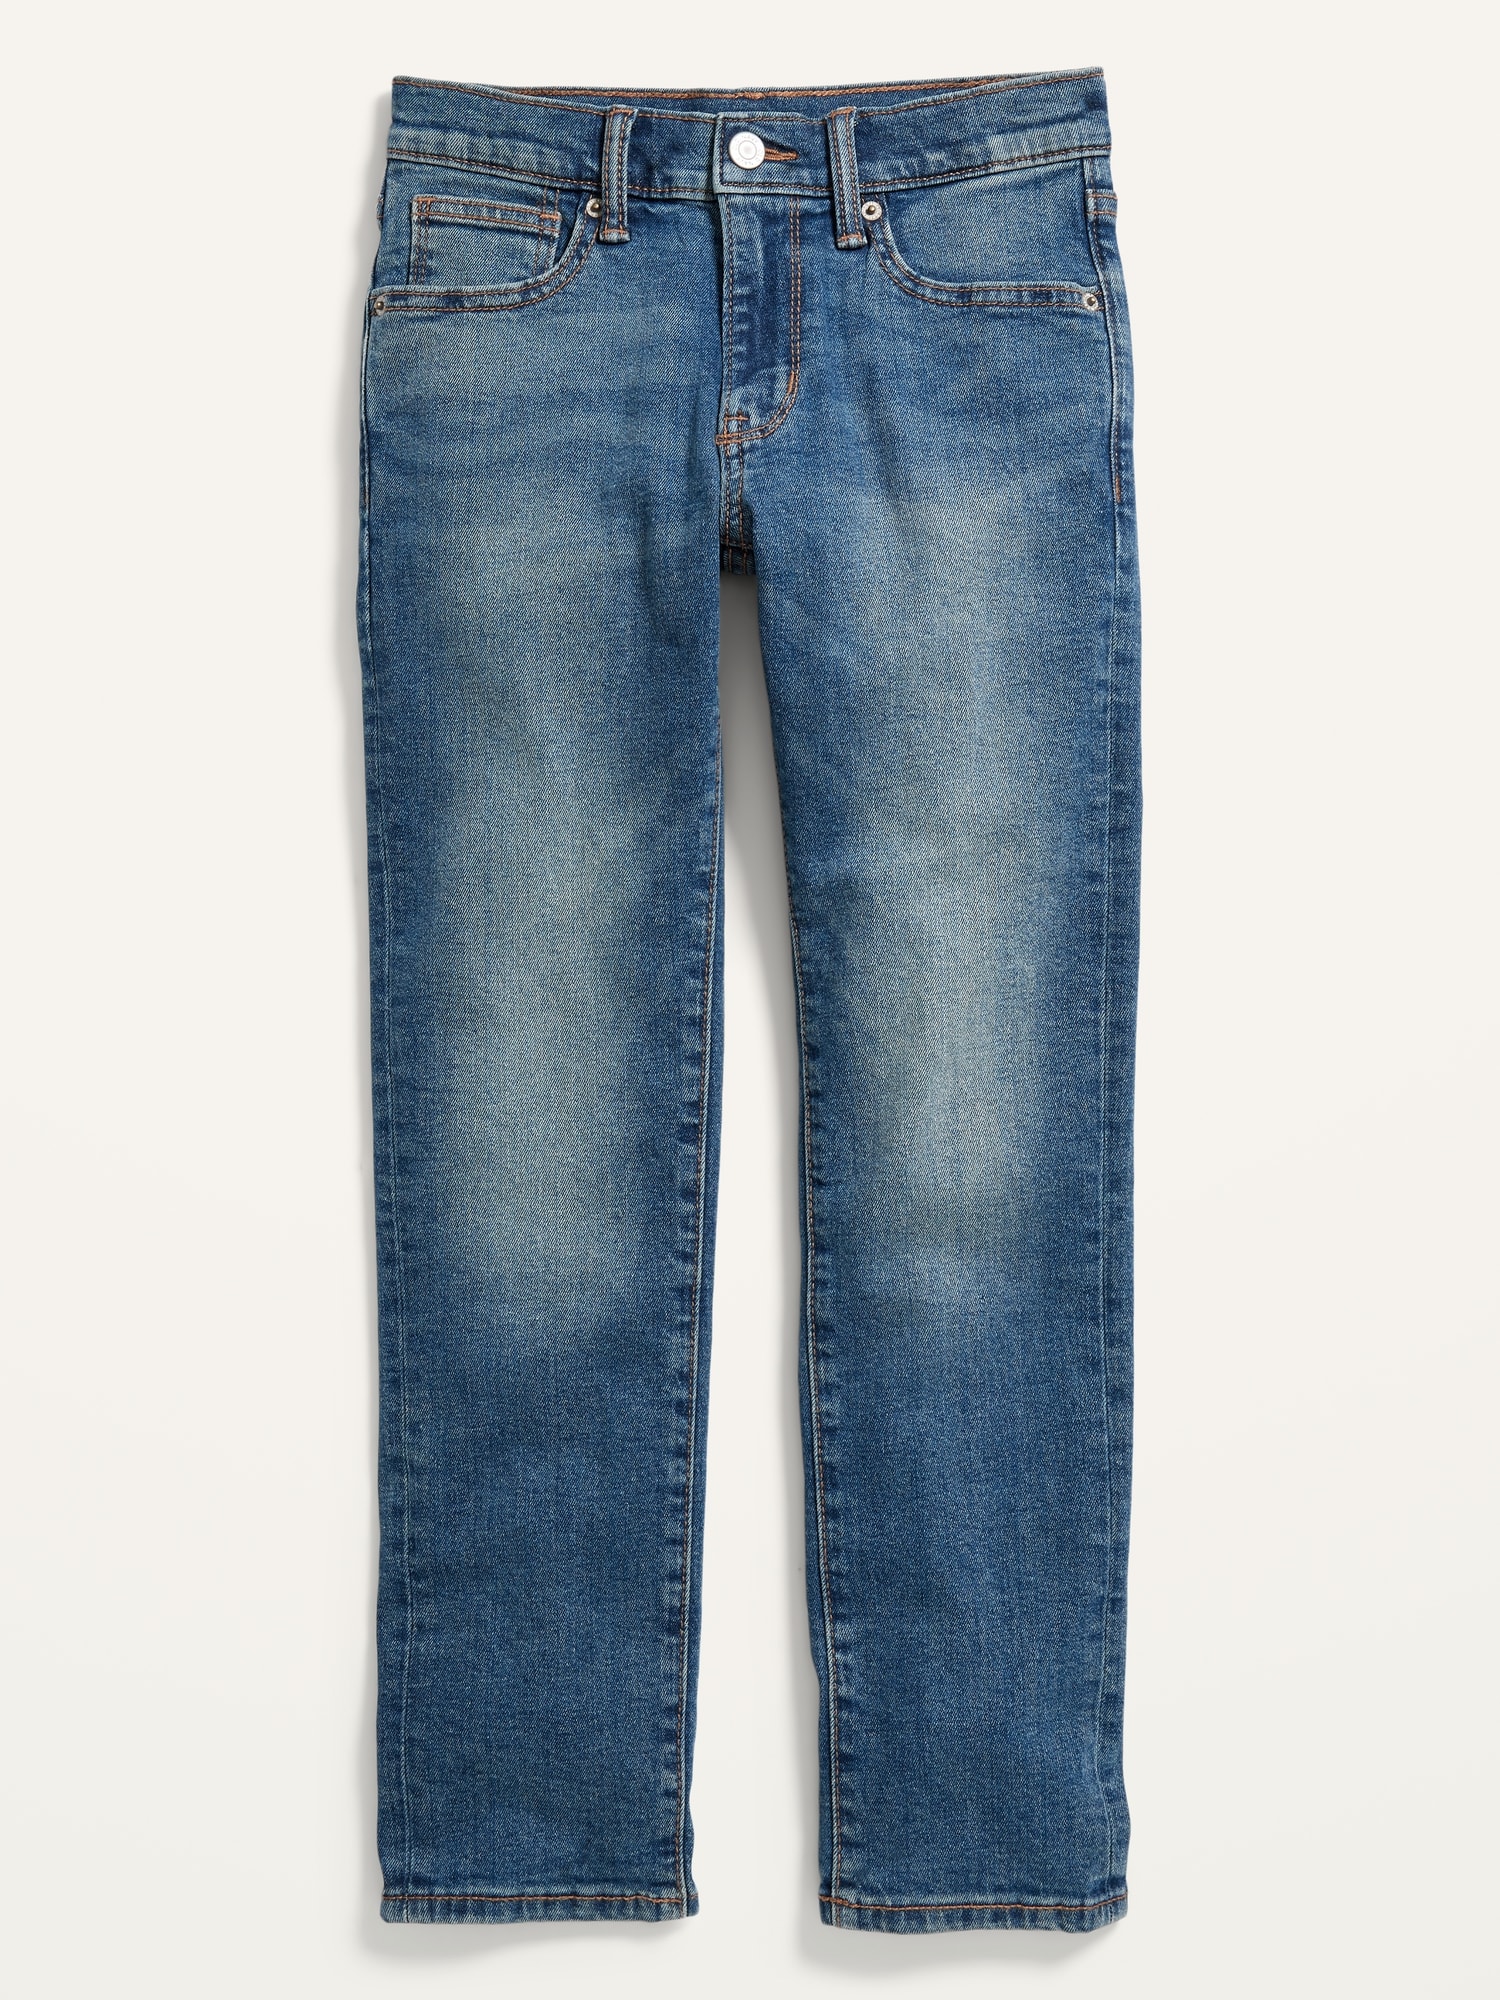 Skinny Jeans for Boys Hot Deal